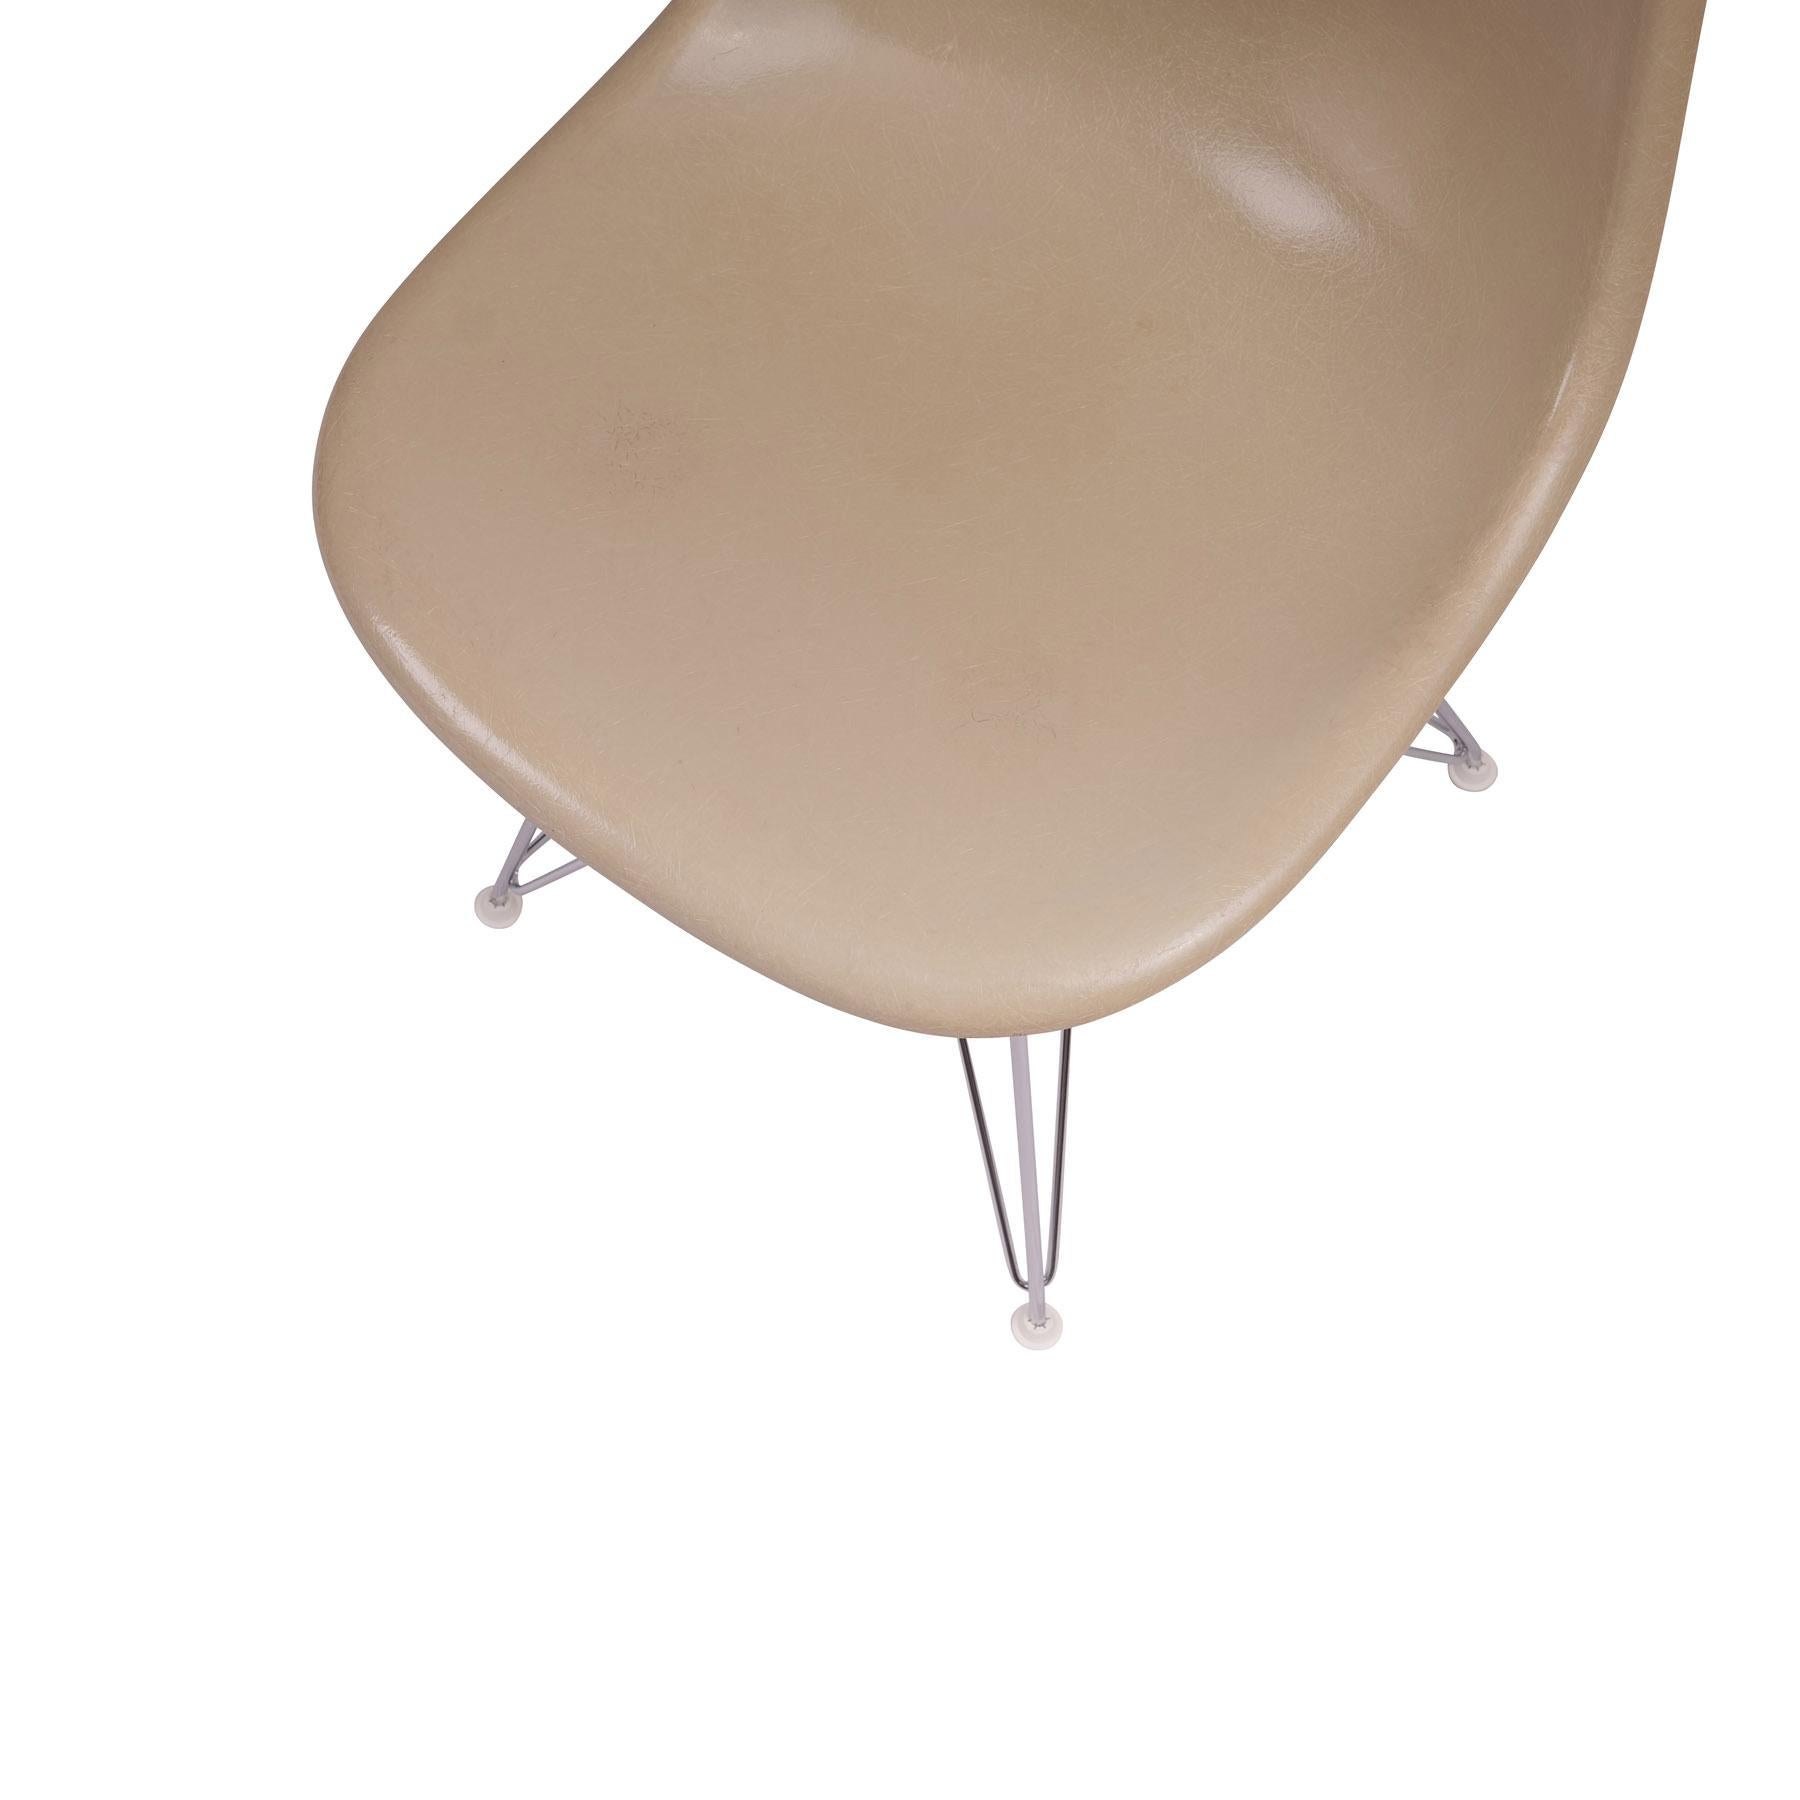 Set of 6 sidechairs, Charles and Ray Eames, fiberglass shell in off-white, 1970s, Vitra Eiffelbase chrome-plated, manufacturer Herman Miller, beautiful vintage condition

height 81 cm, width 47 cm, depth 43 cm

Charles Eames, born in 1907 in St.